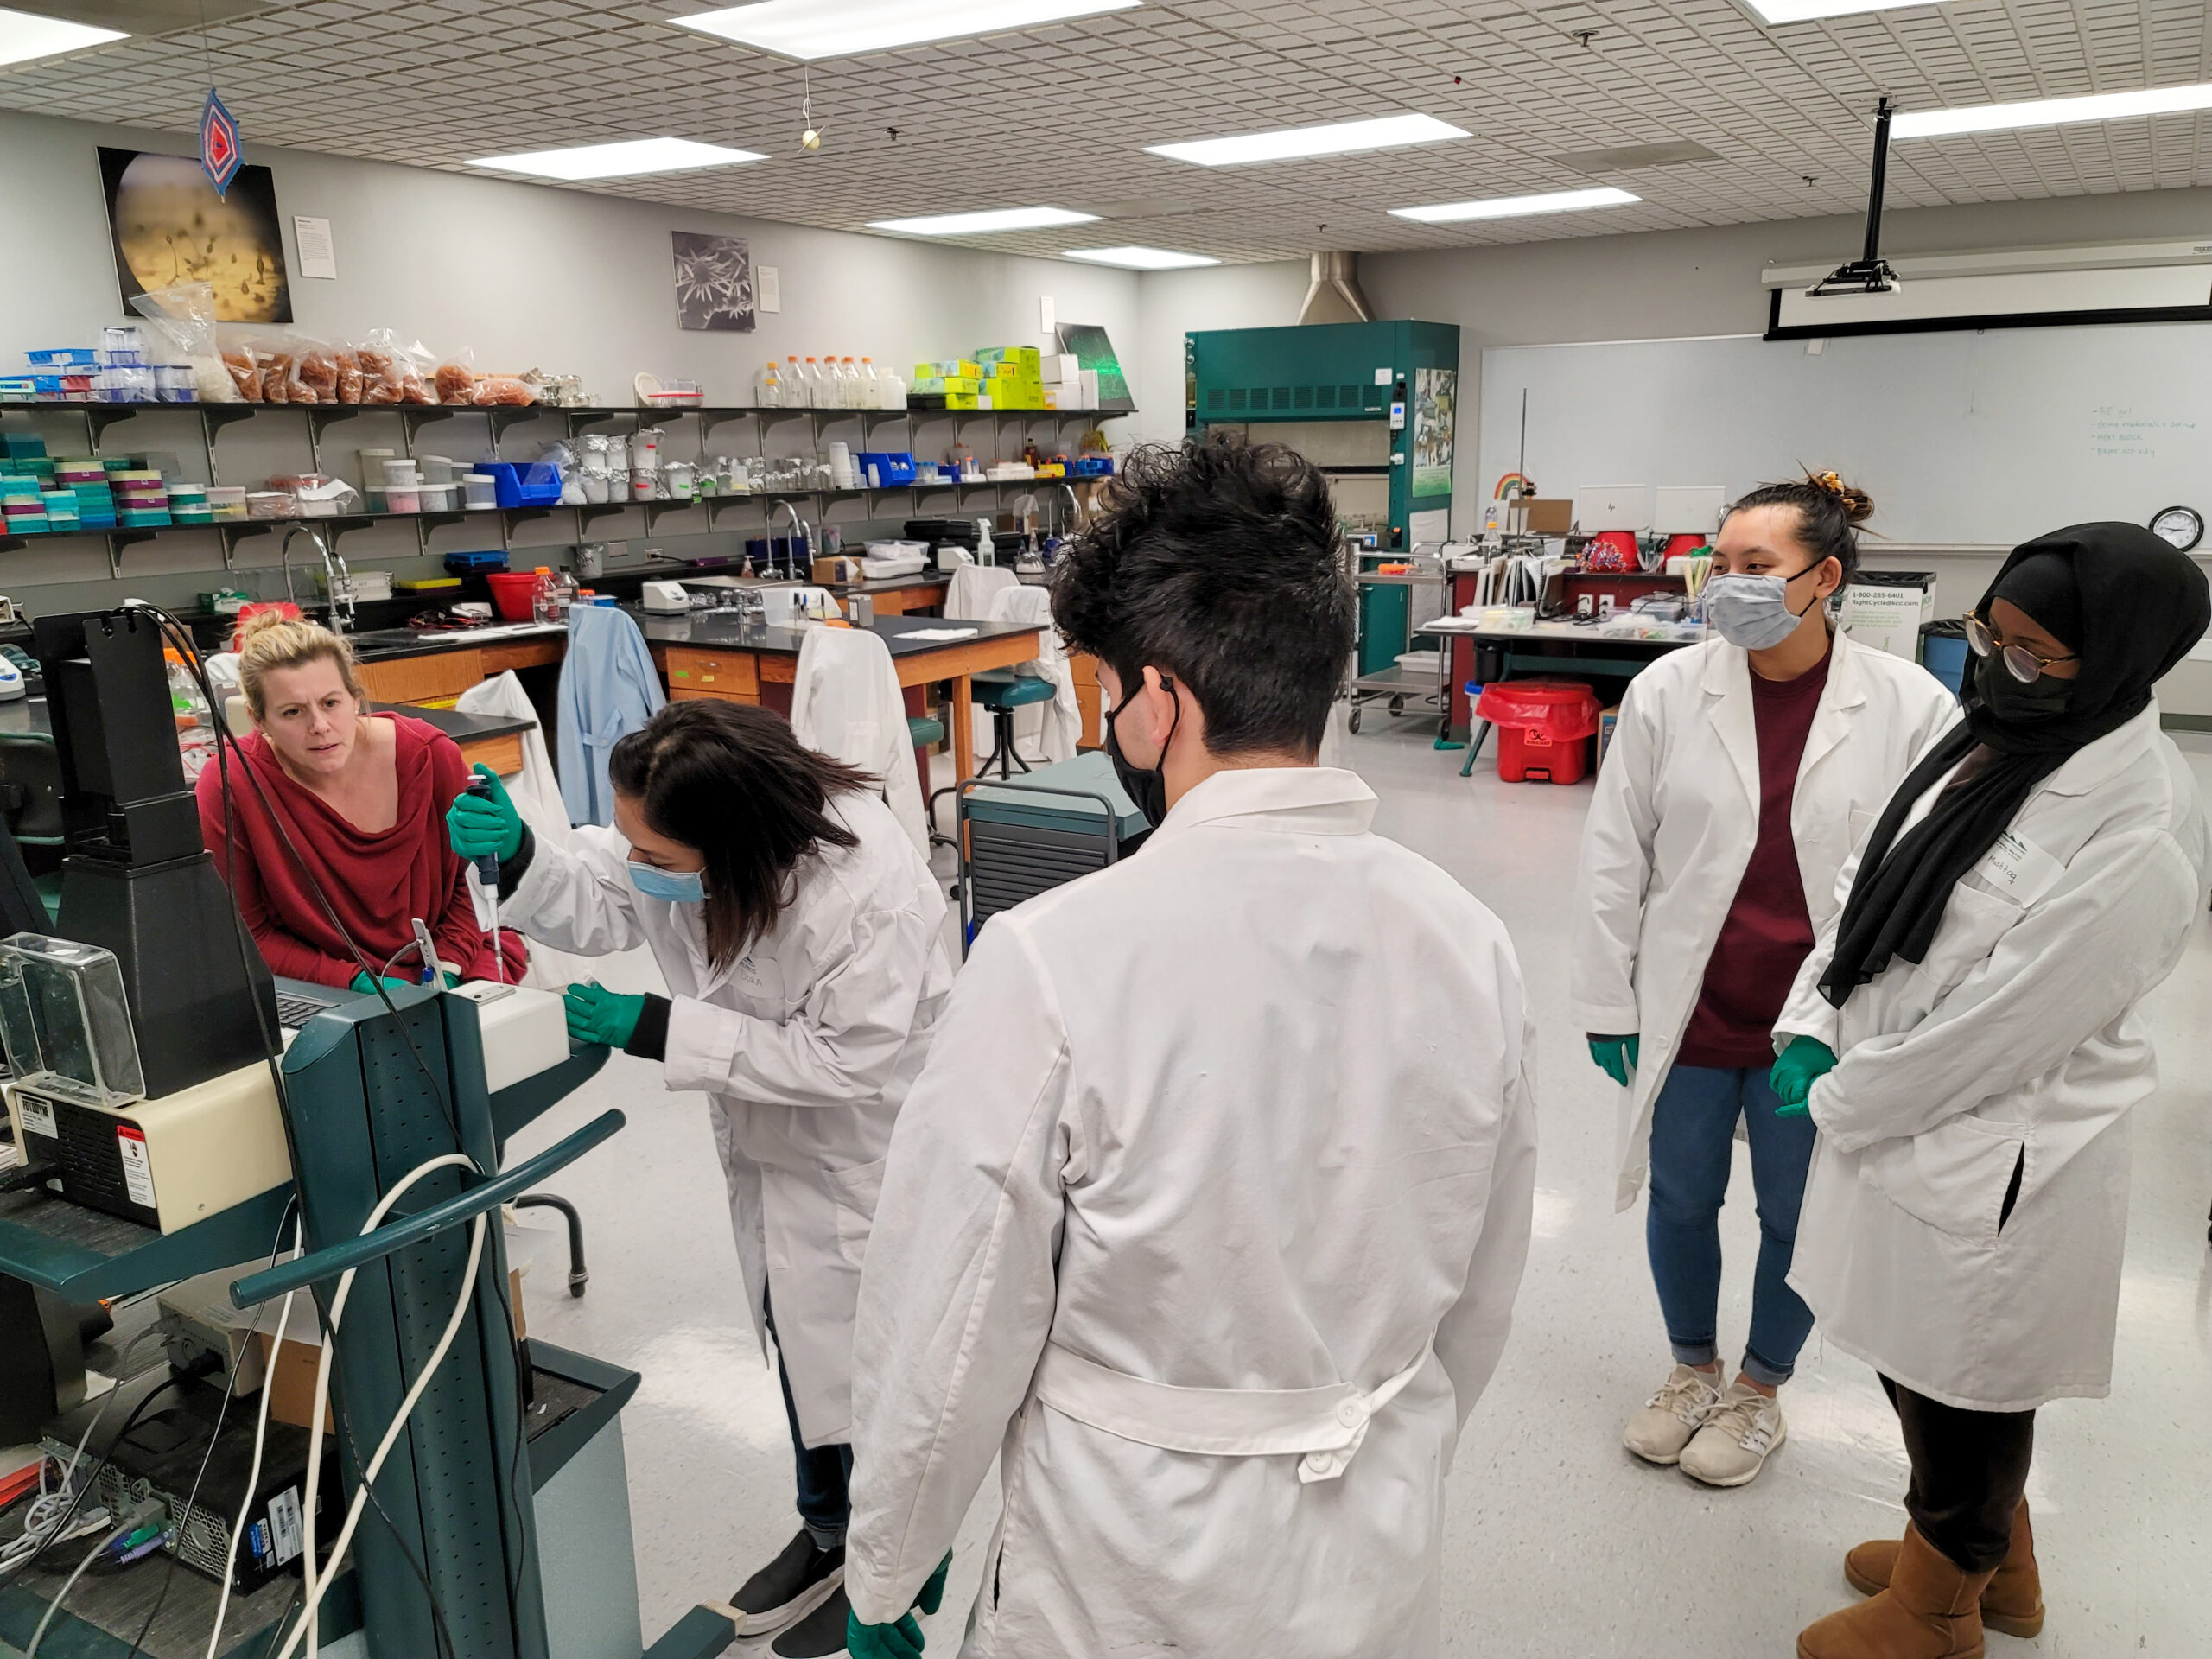 Four students work in a science lab wearing white lab coats, green surgical gloves, and face masks while an instructor in a red shirt watches.